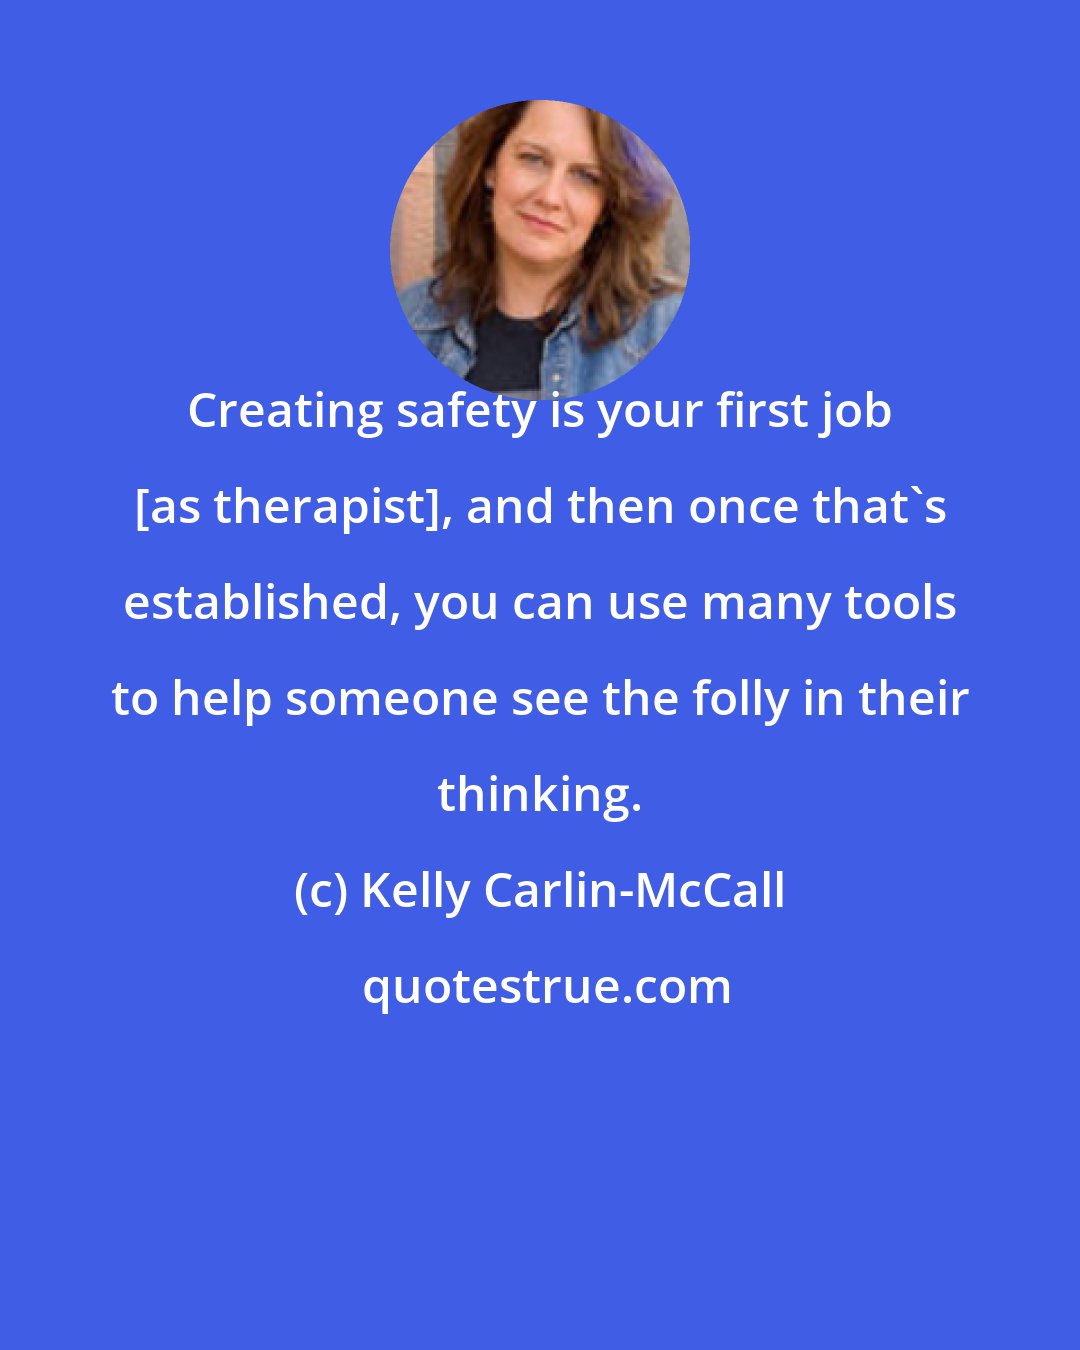 Kelly Carlin-McCall: Creating safety is your first job [as therapist], and then once that's established, you can use many tools to help someone see the folly in their thinking.